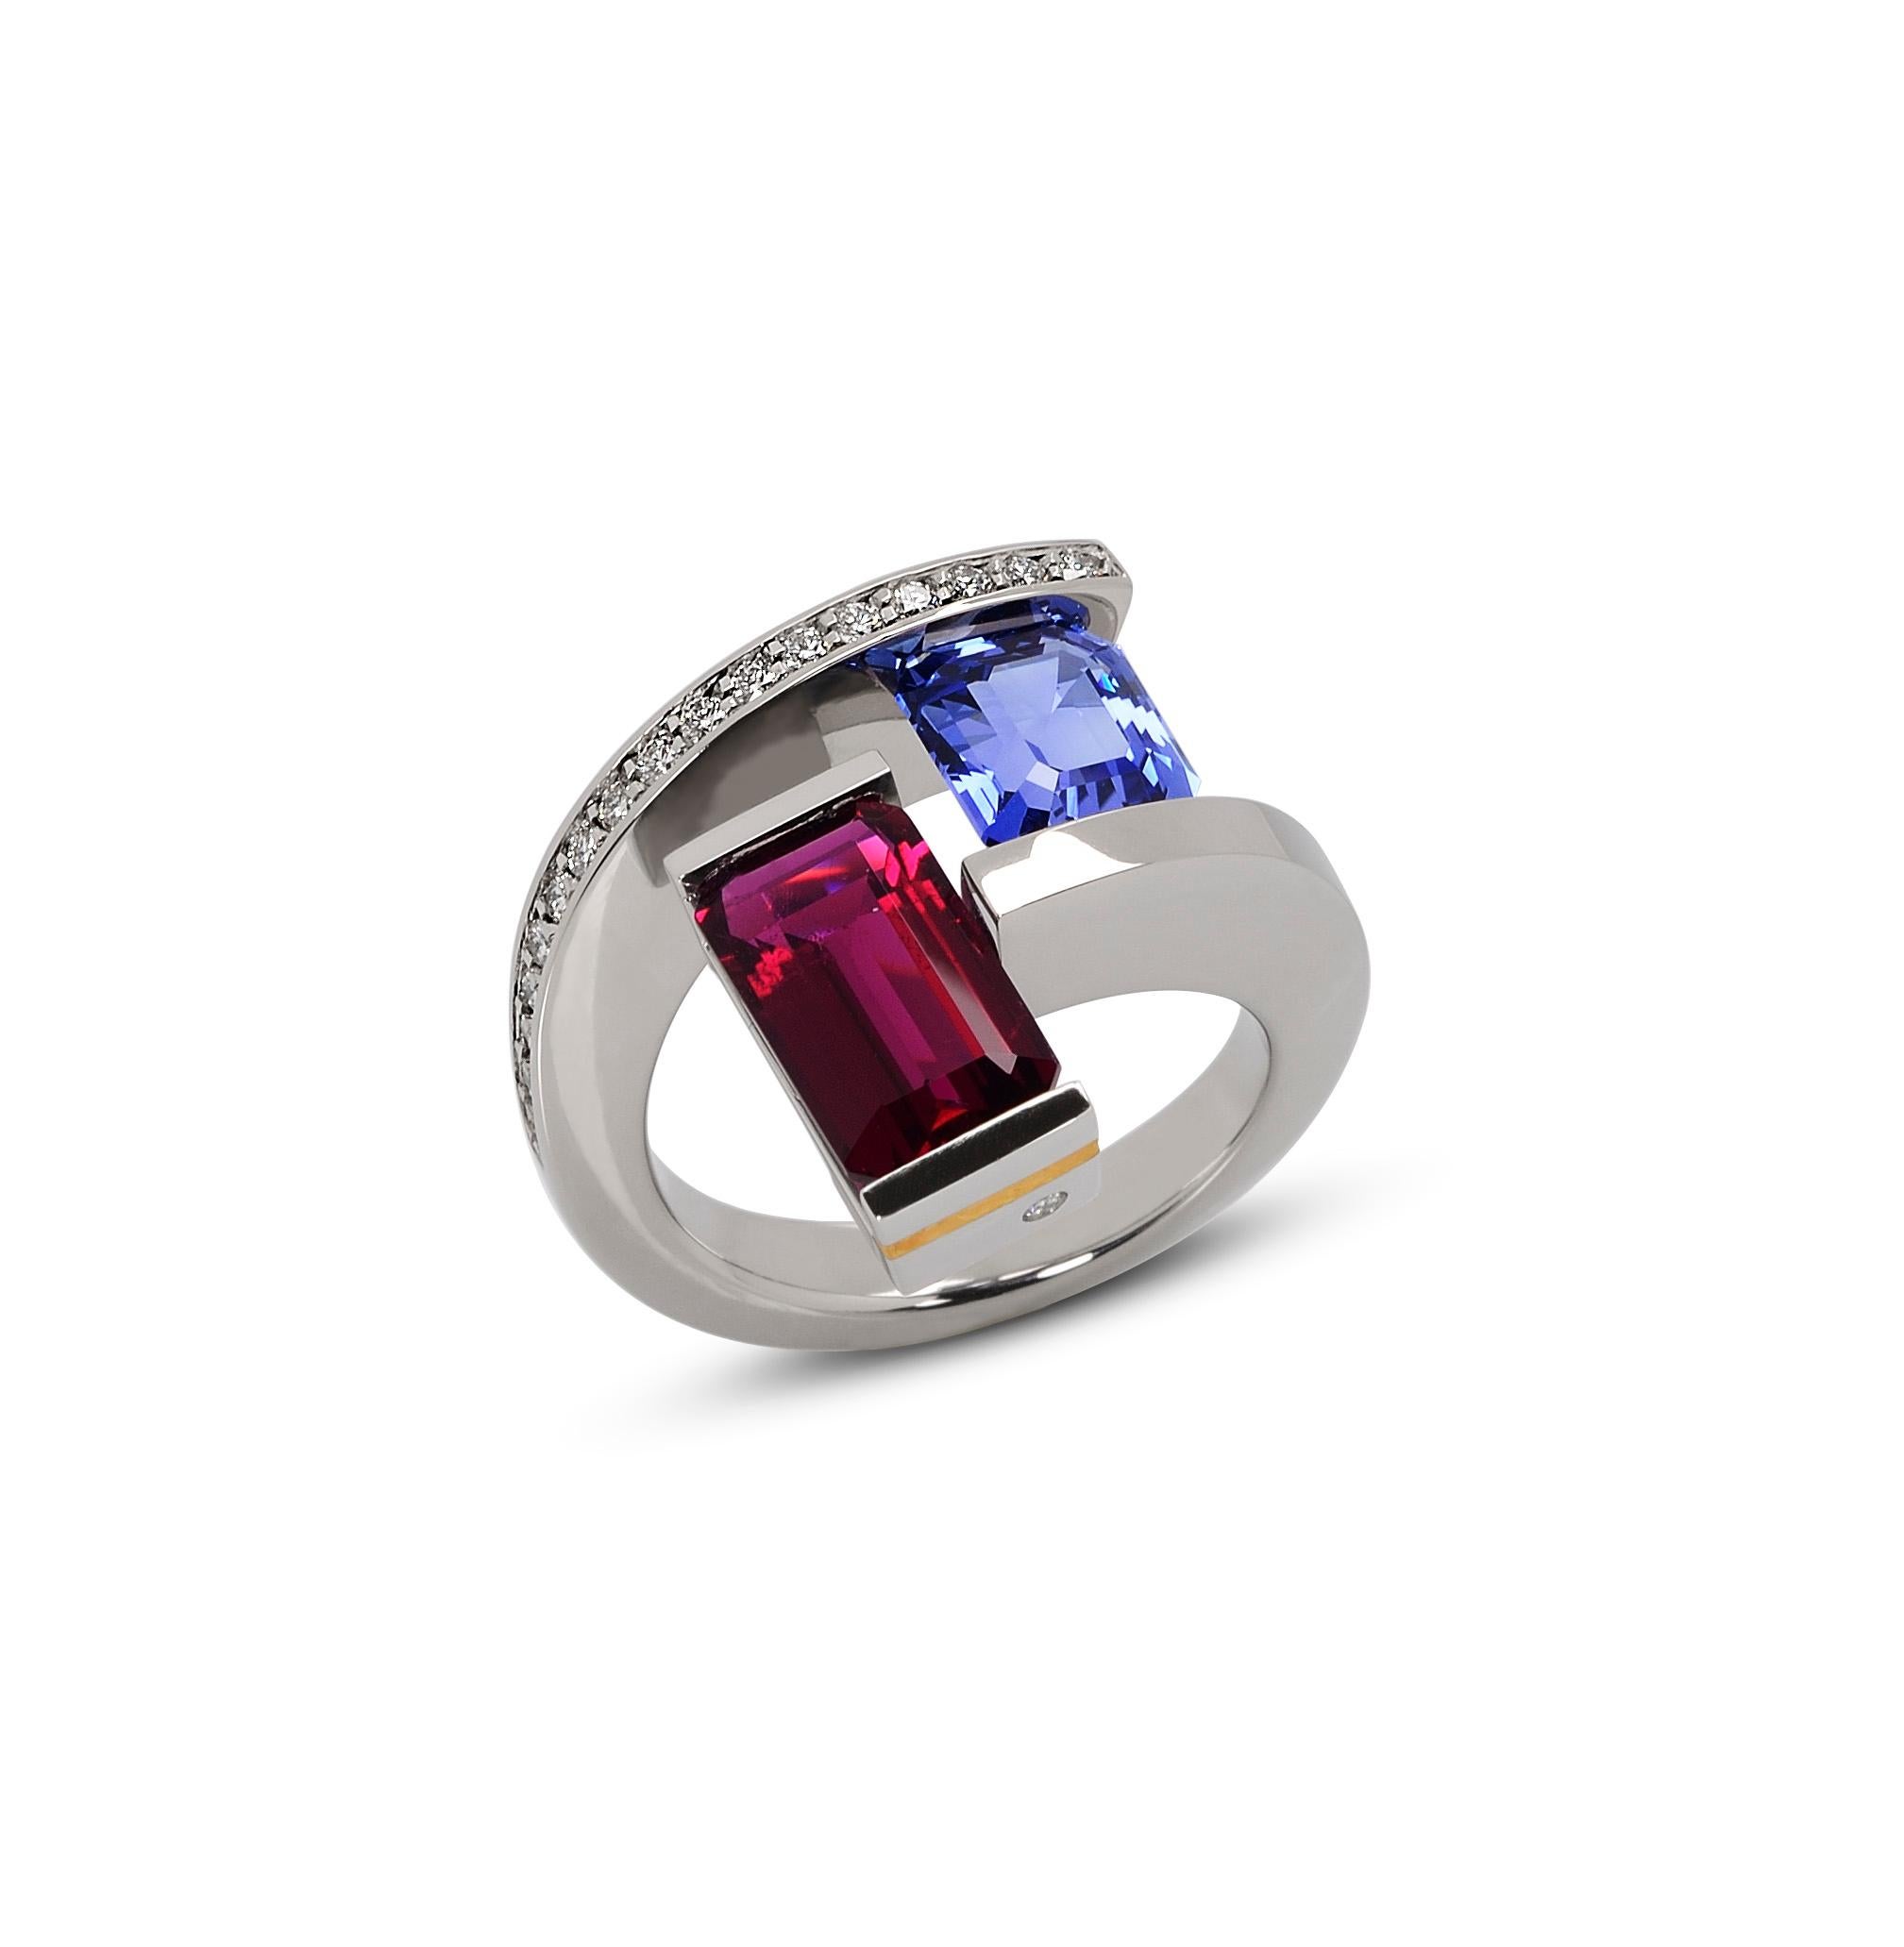 Emerald Cut Platinum 2-Stone Helix Ring with Tension-Set Blue Sapphire and Rubellite For Sale